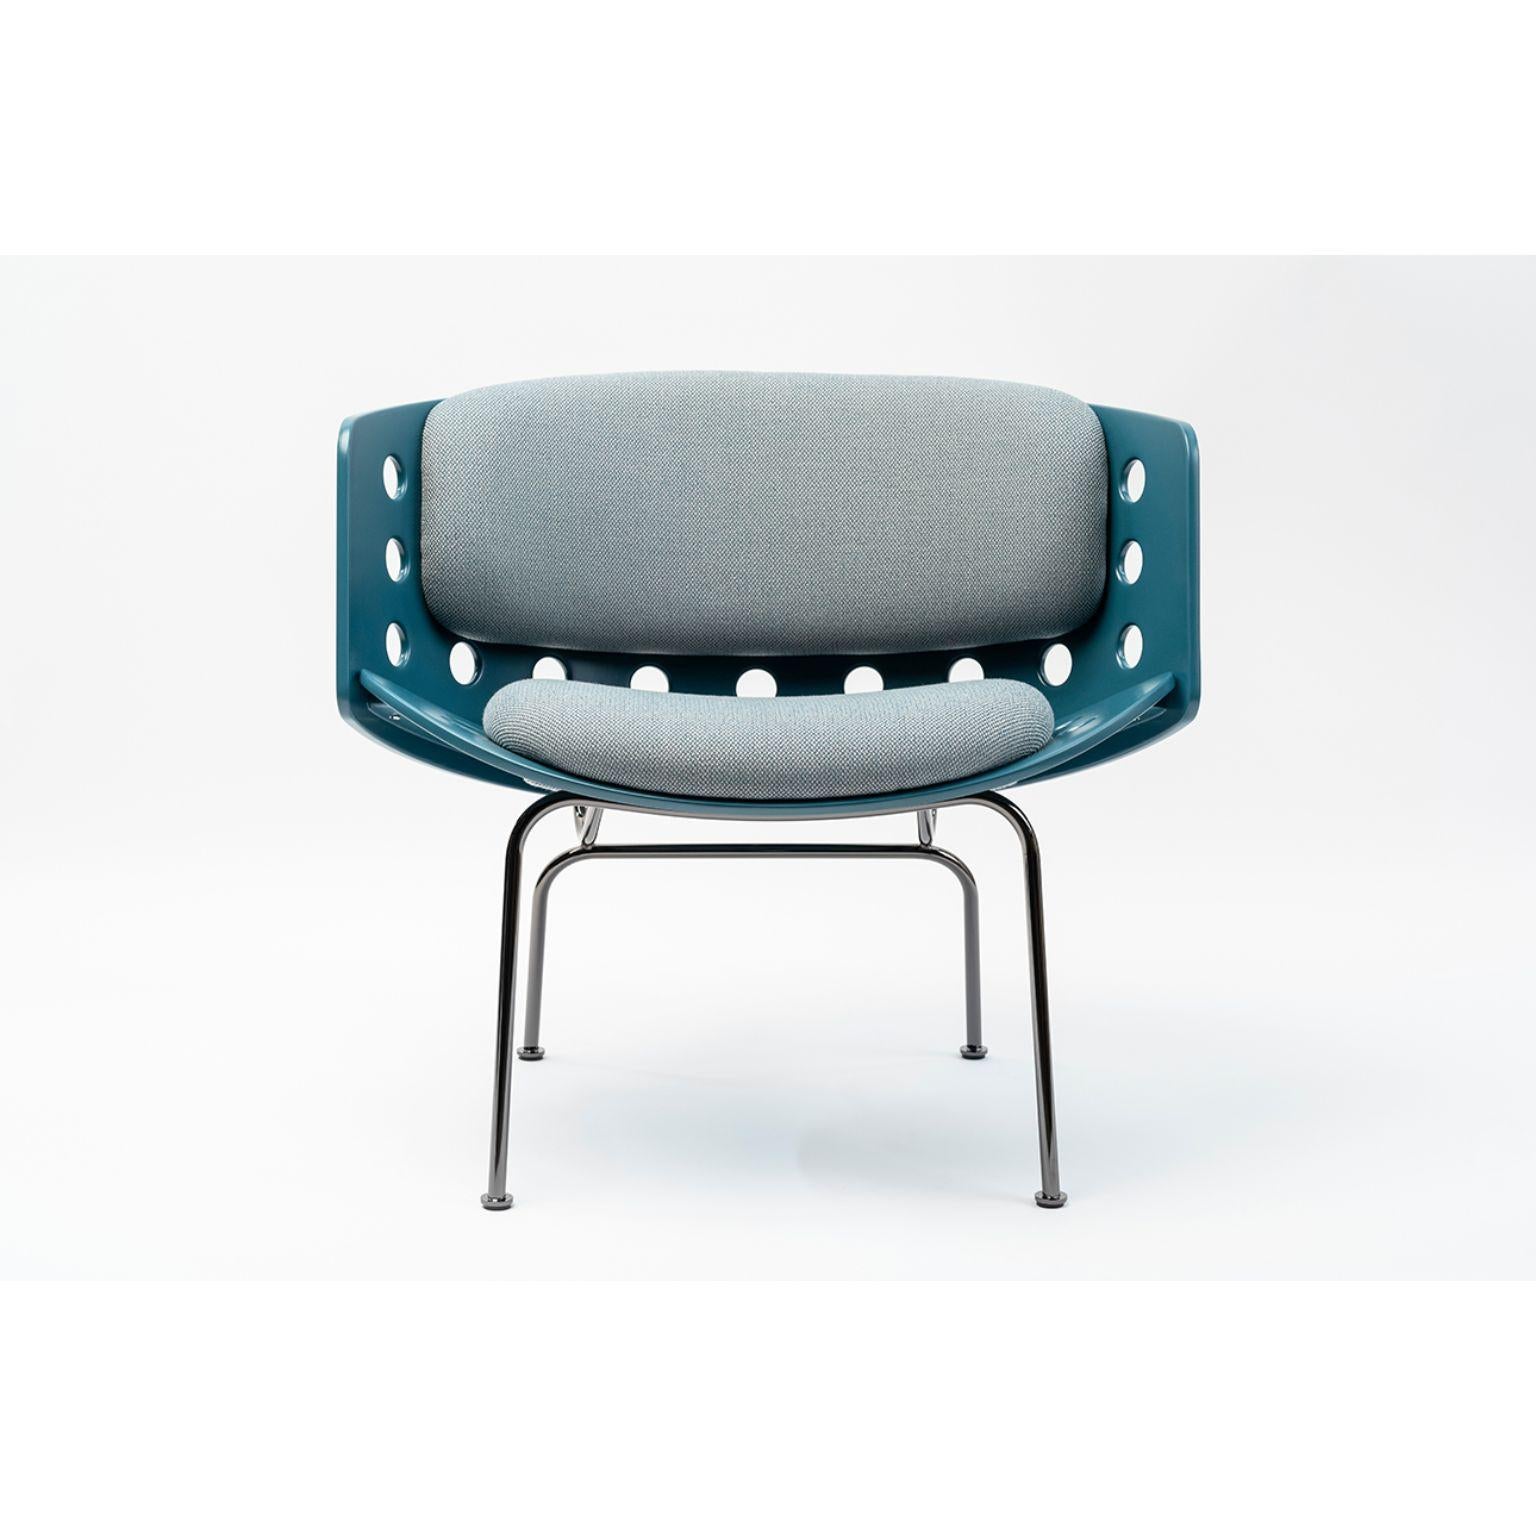 French Melitea Lounge Chair by Luca Nichetto